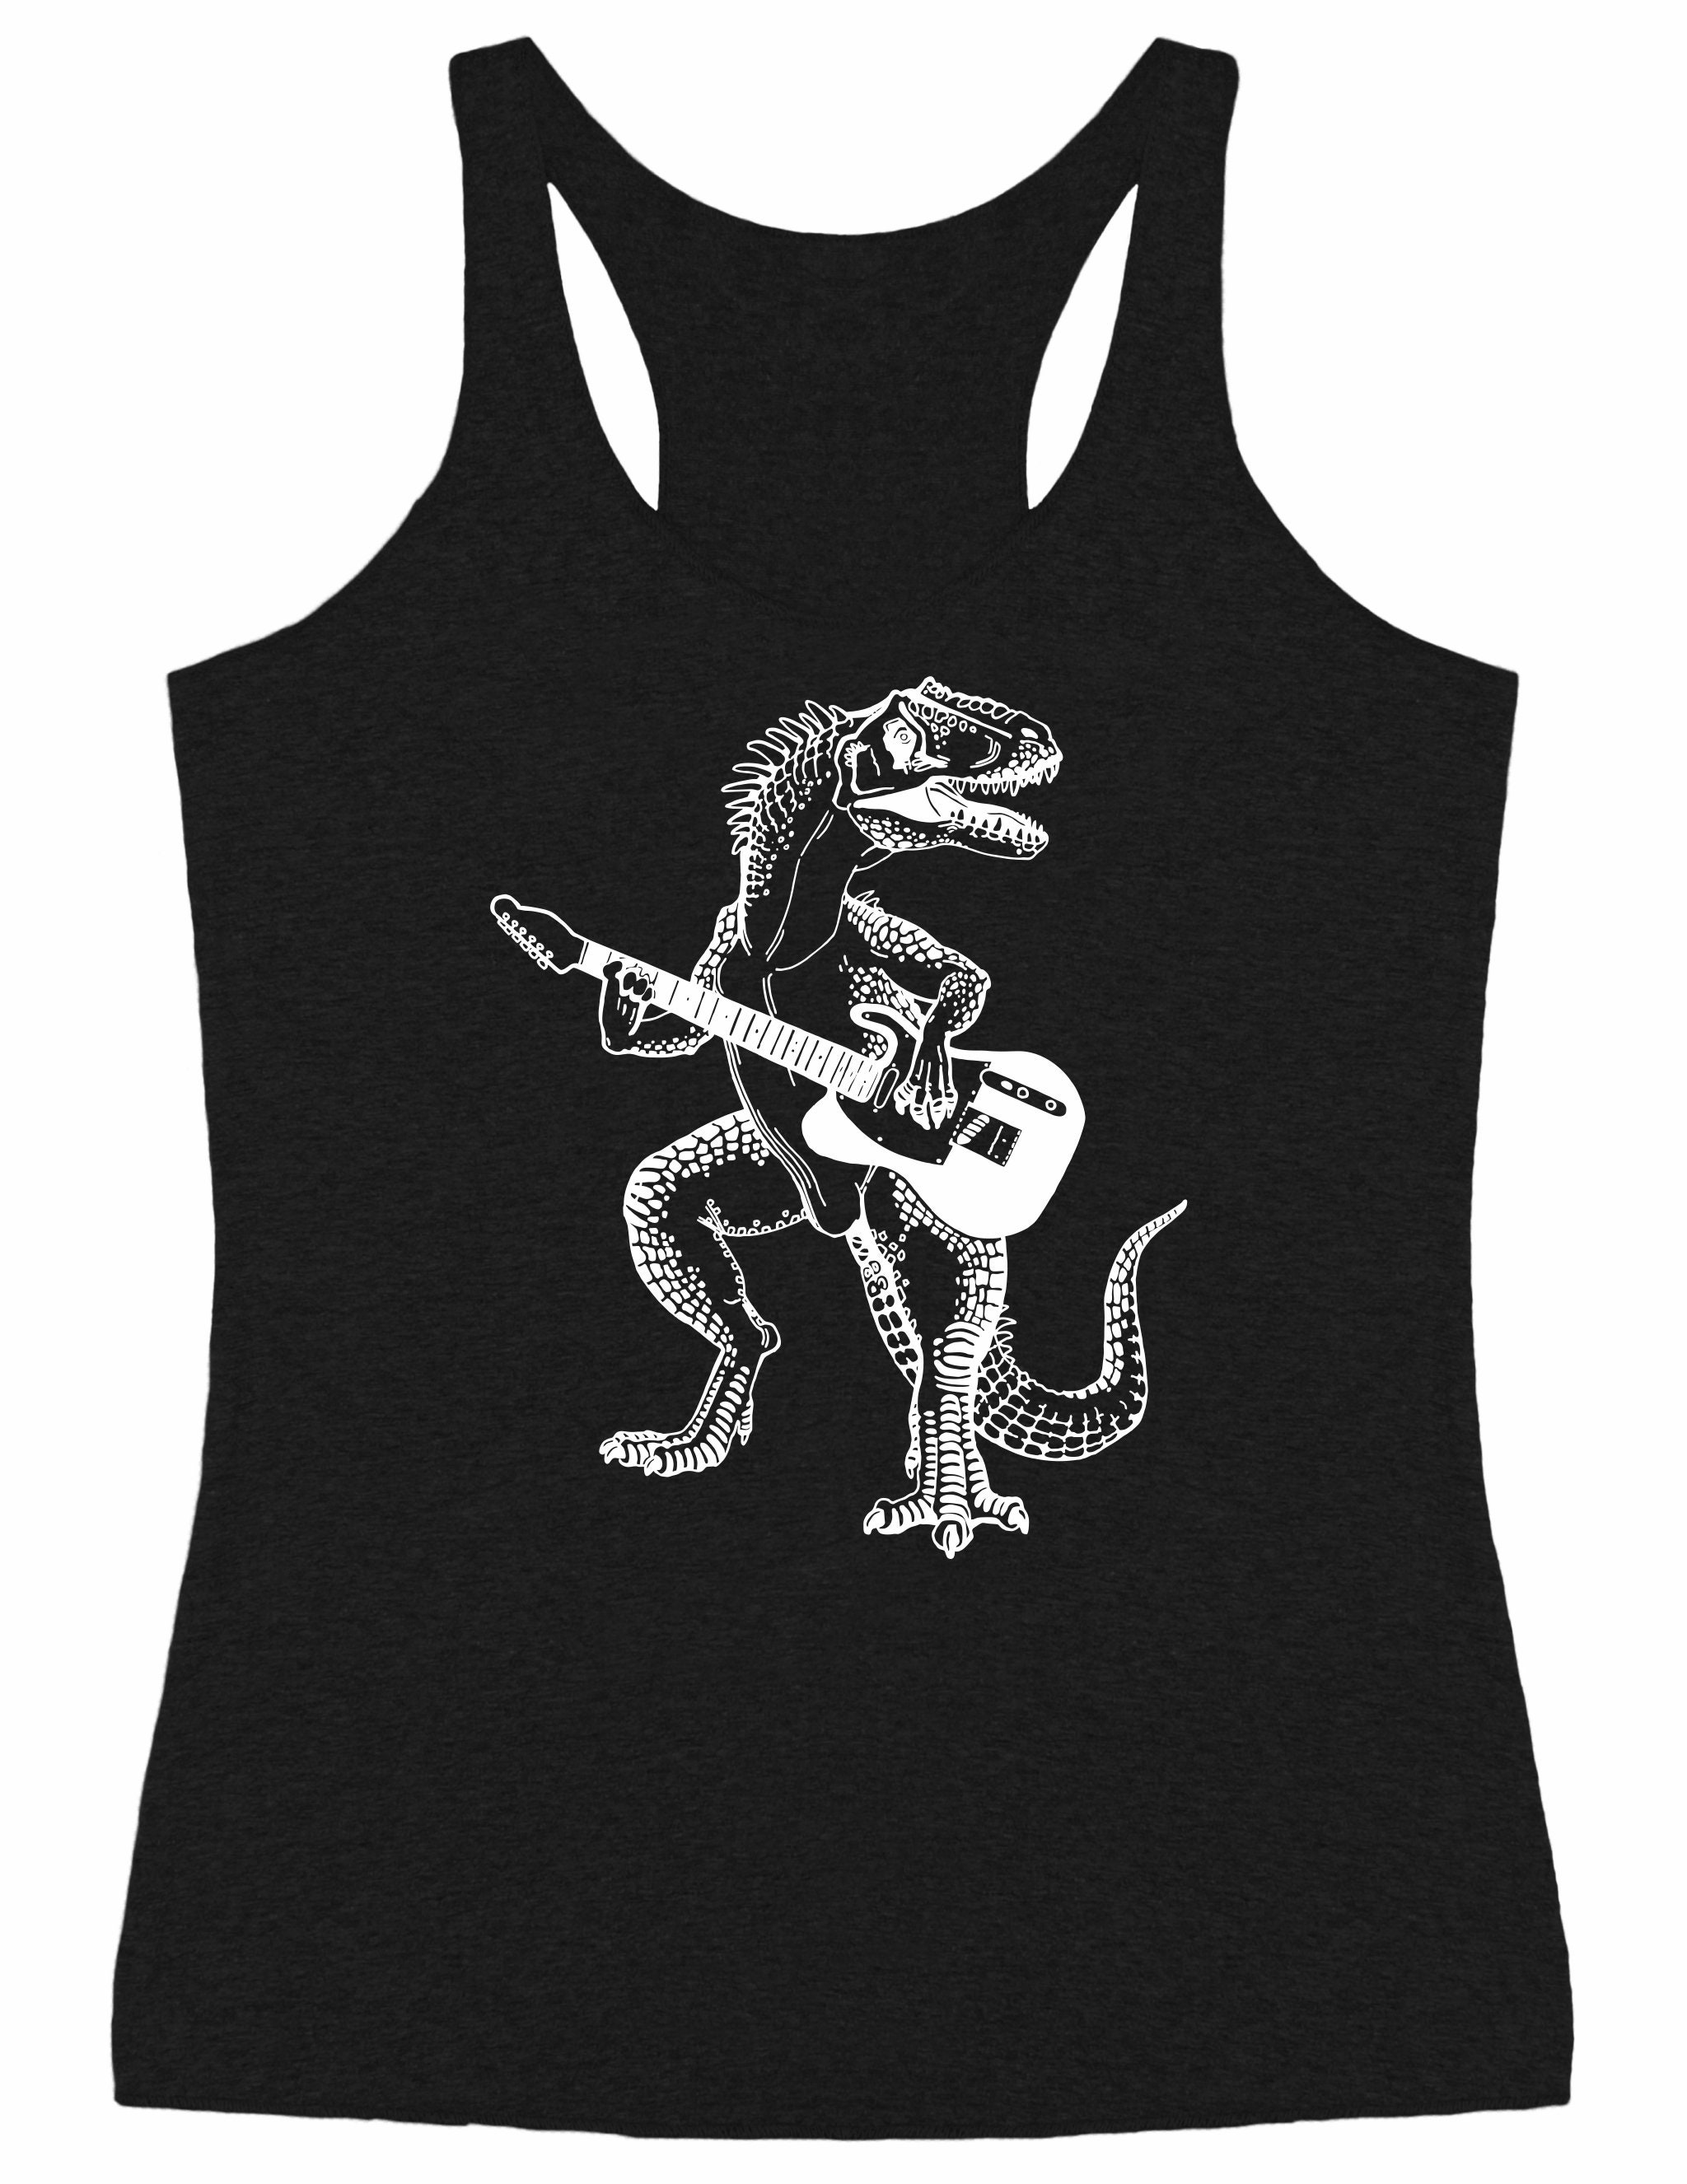 Dinosaur Playing Guitar Women's Tr-Blend Tank Top Gift For Her, Girlfriend Birthday, Musician Wife Gift, Music Gifts Mom Seembo